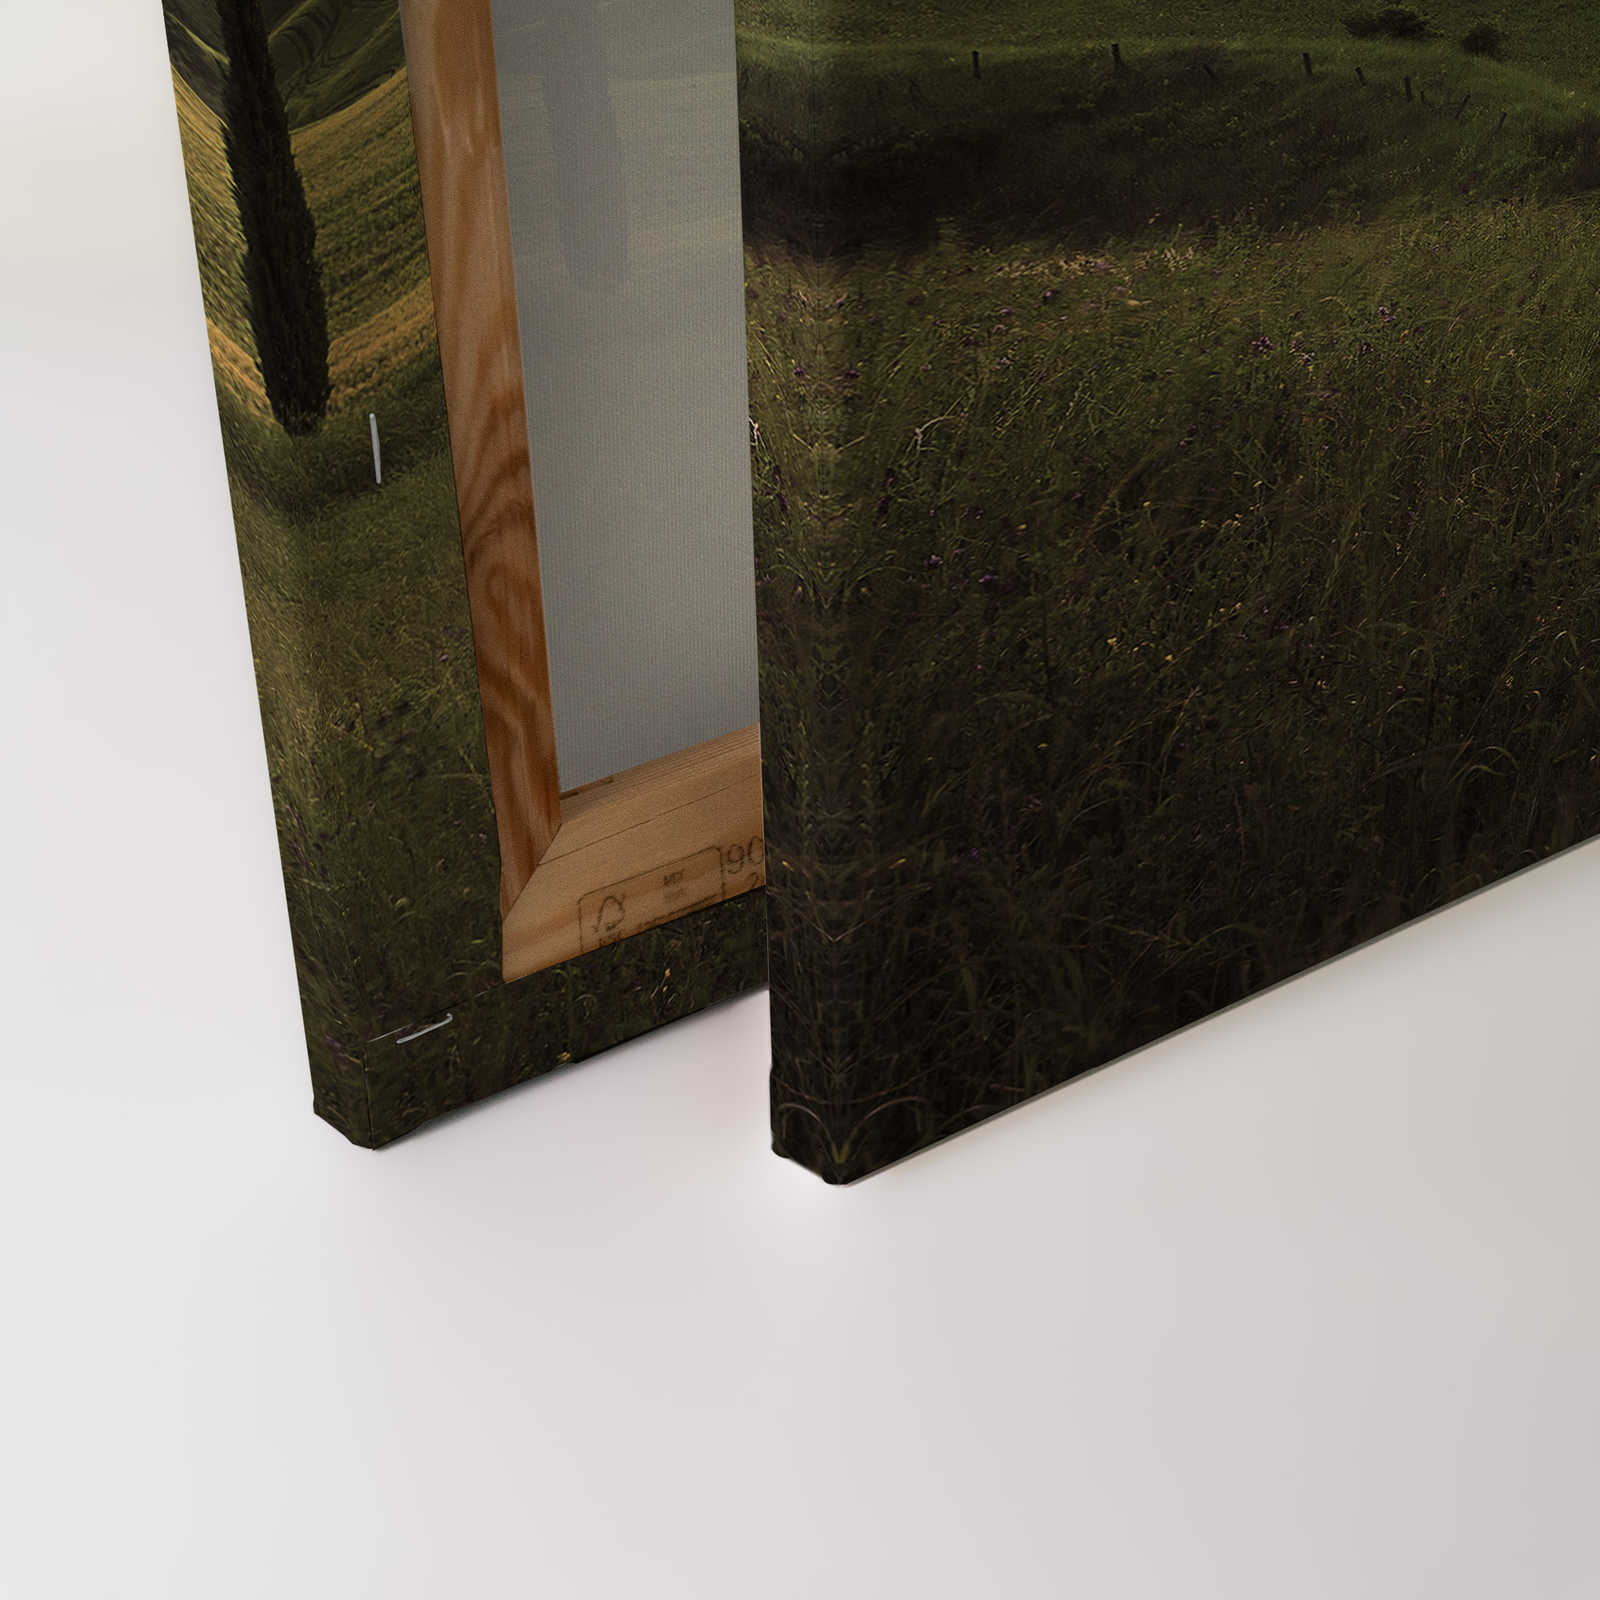             Canvas with Tuscan landscape at dusk - 0.90 m x 0.60 m
        